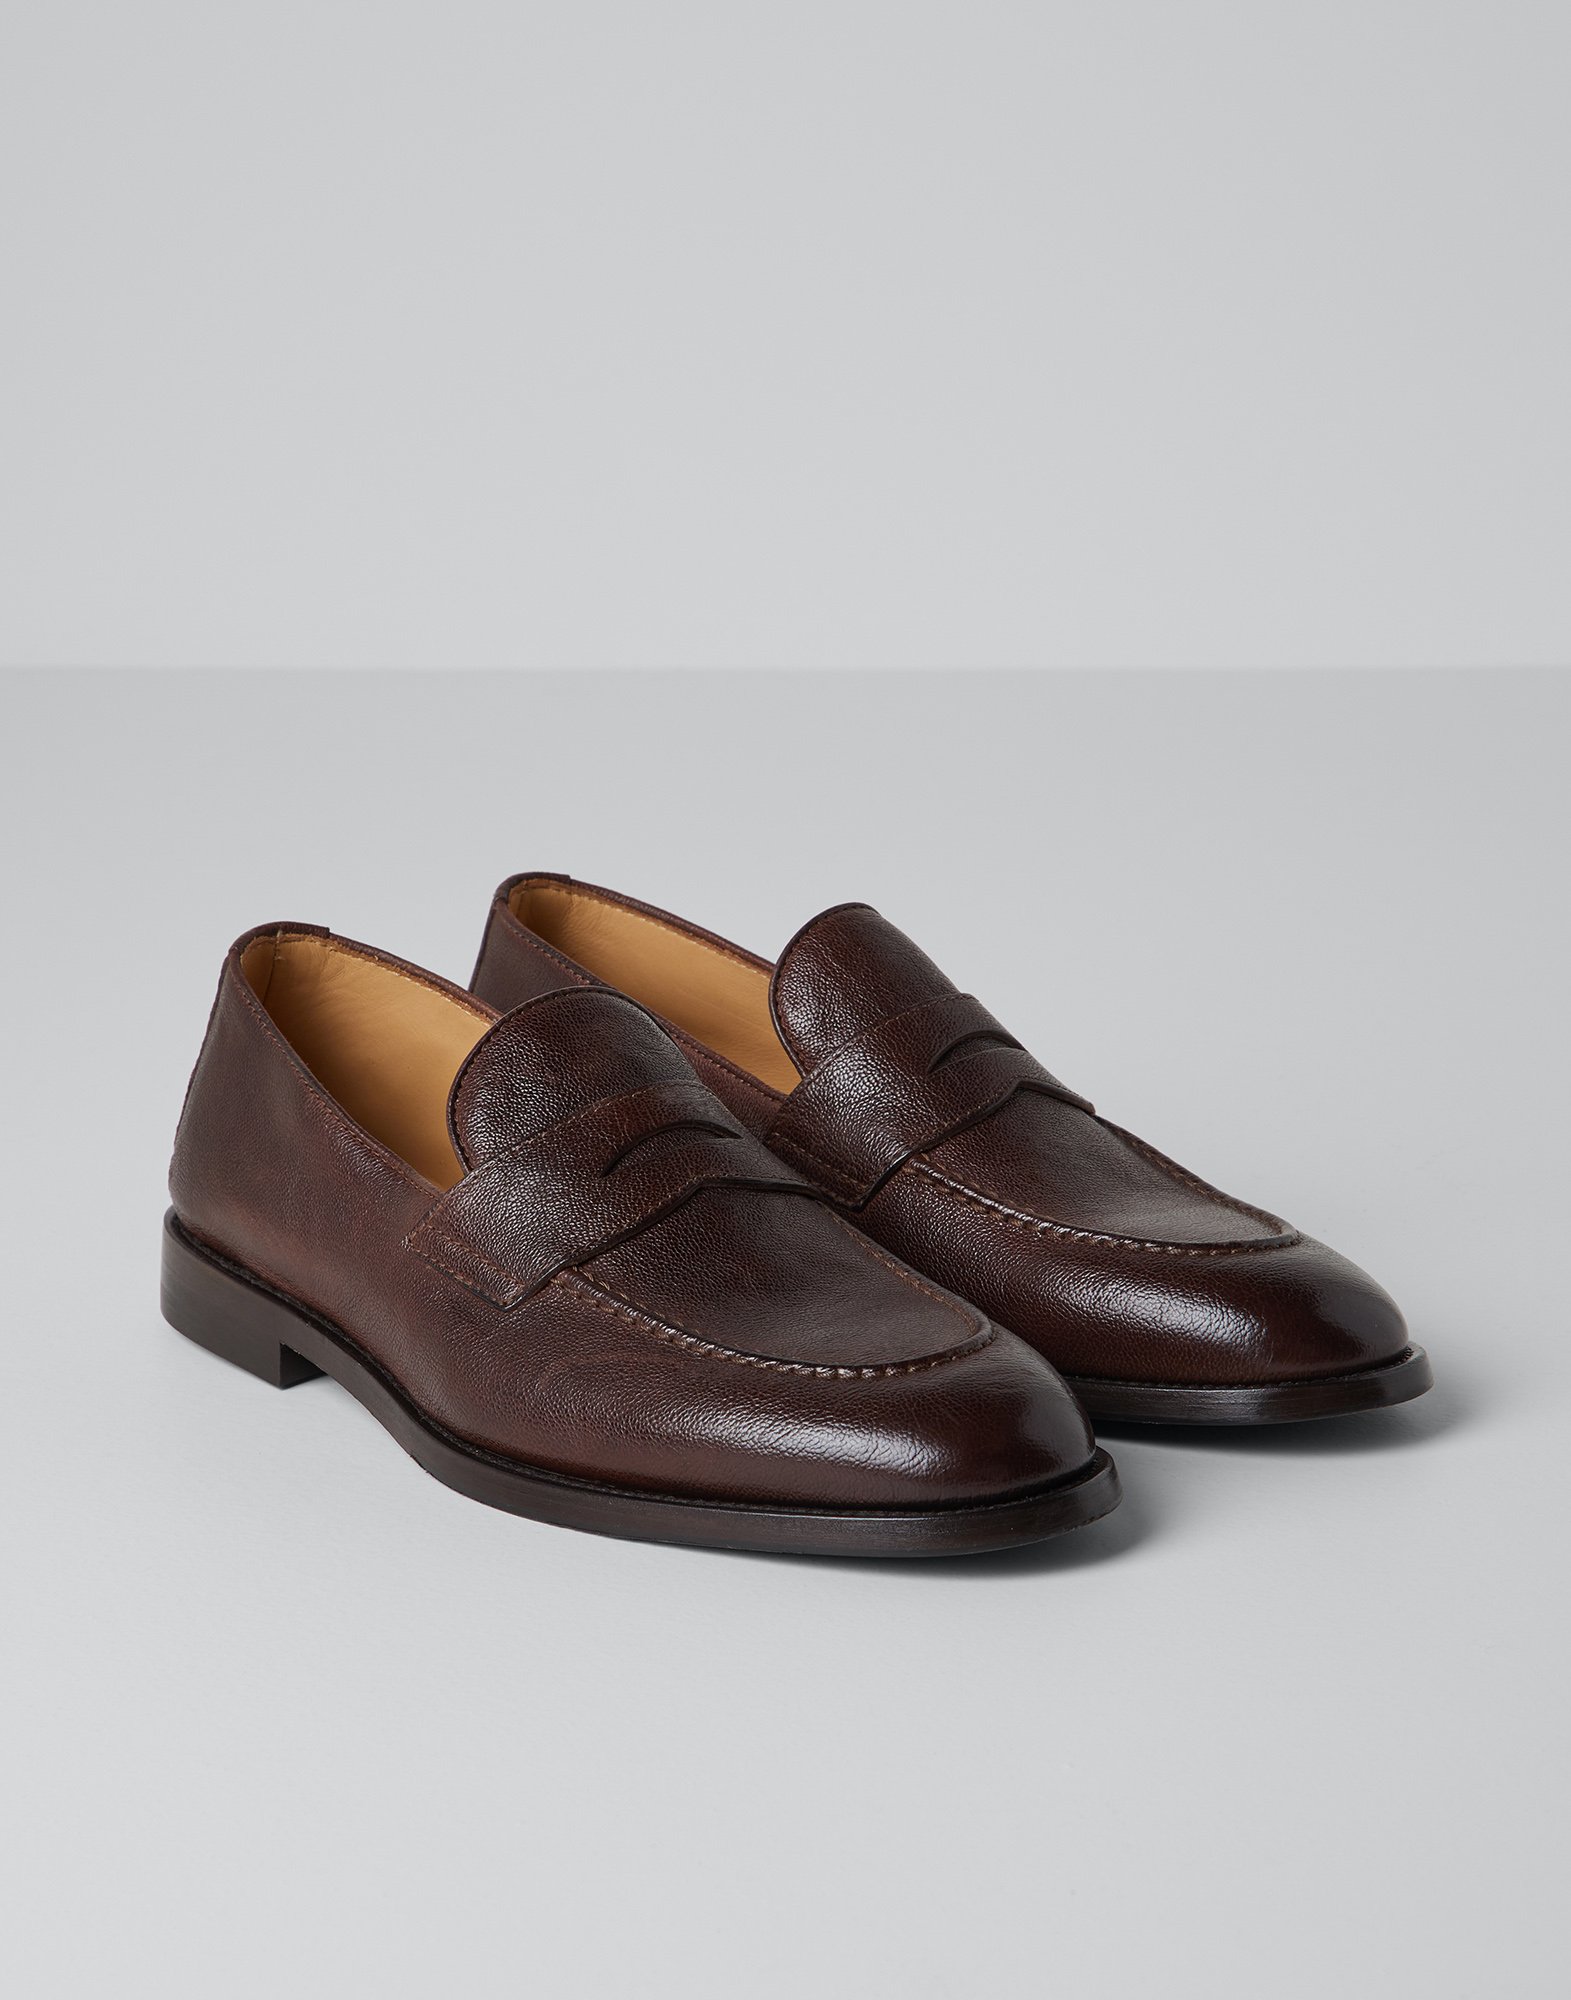 Calfskin penny loafers